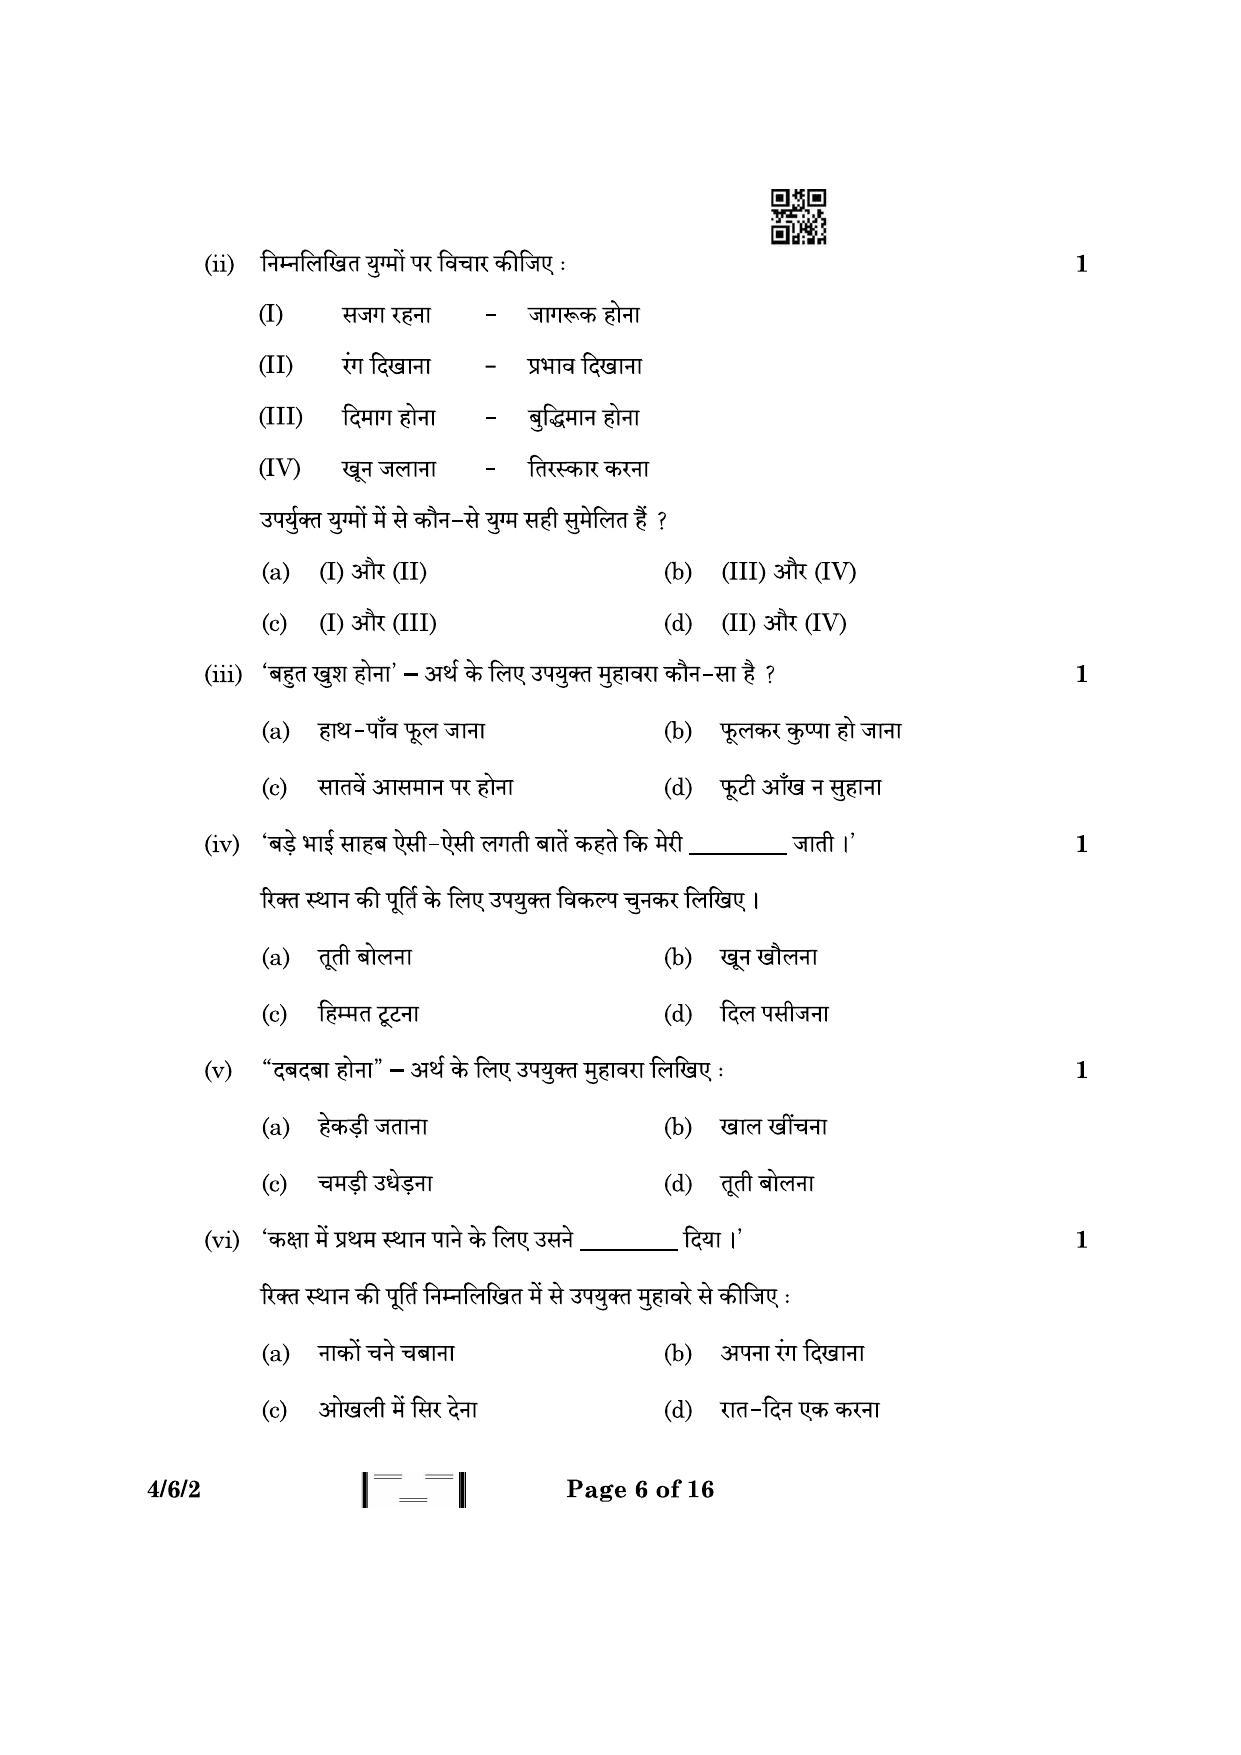 CBSE Class 10 4-6-2 Hindi B 2023 Question Paper - Page 6